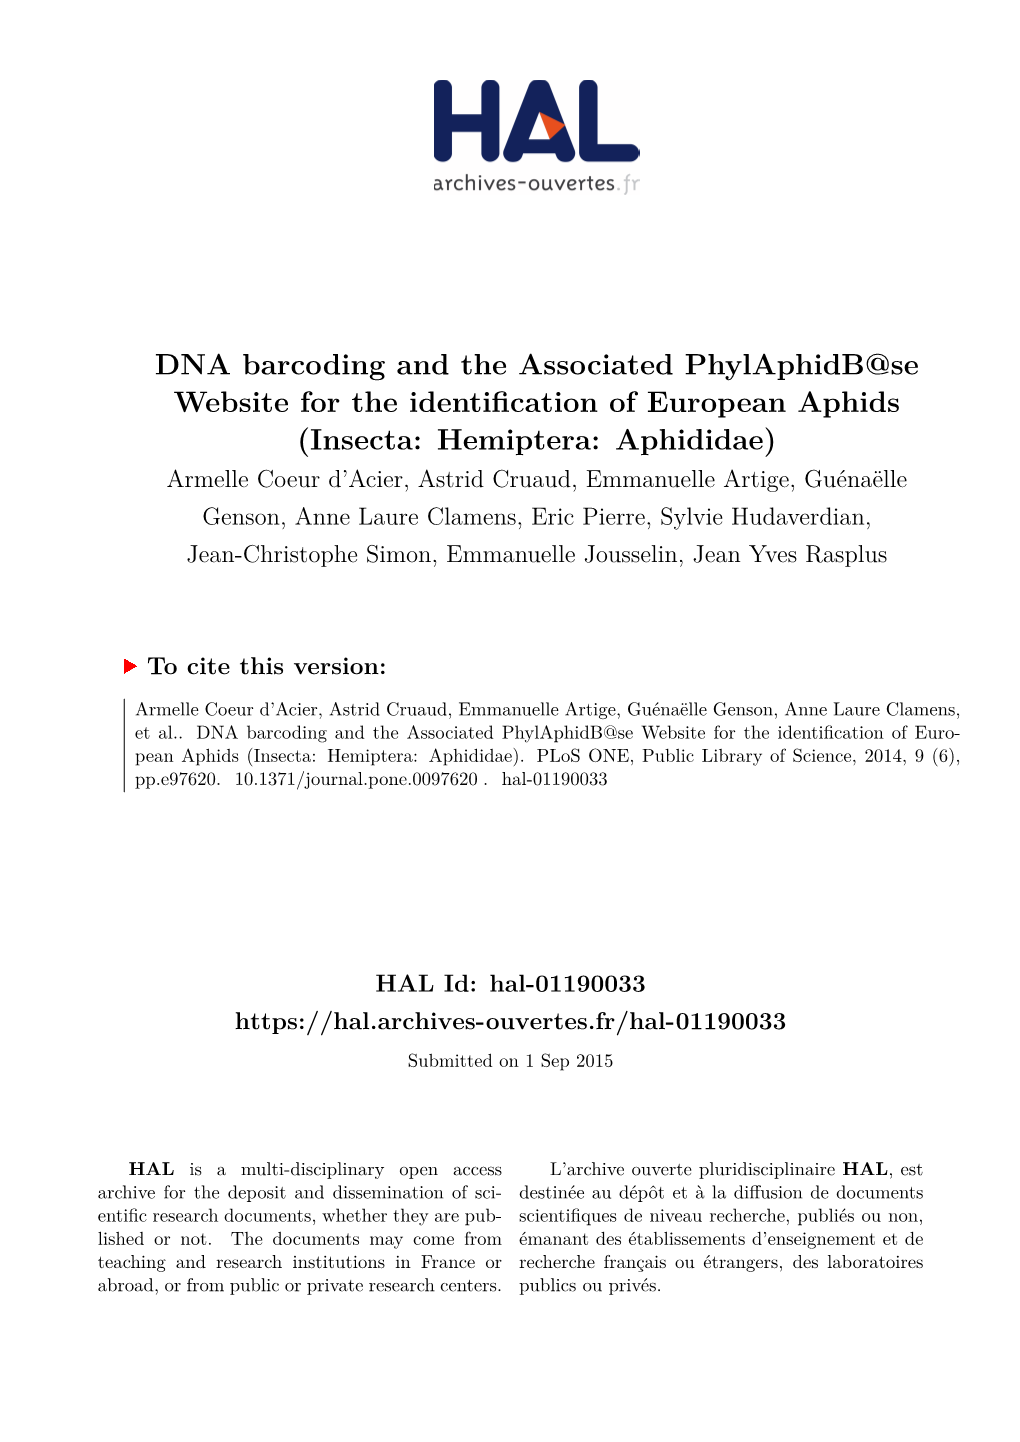 DNA Barcoding and the Associated Phylaphidb@Se Website for The